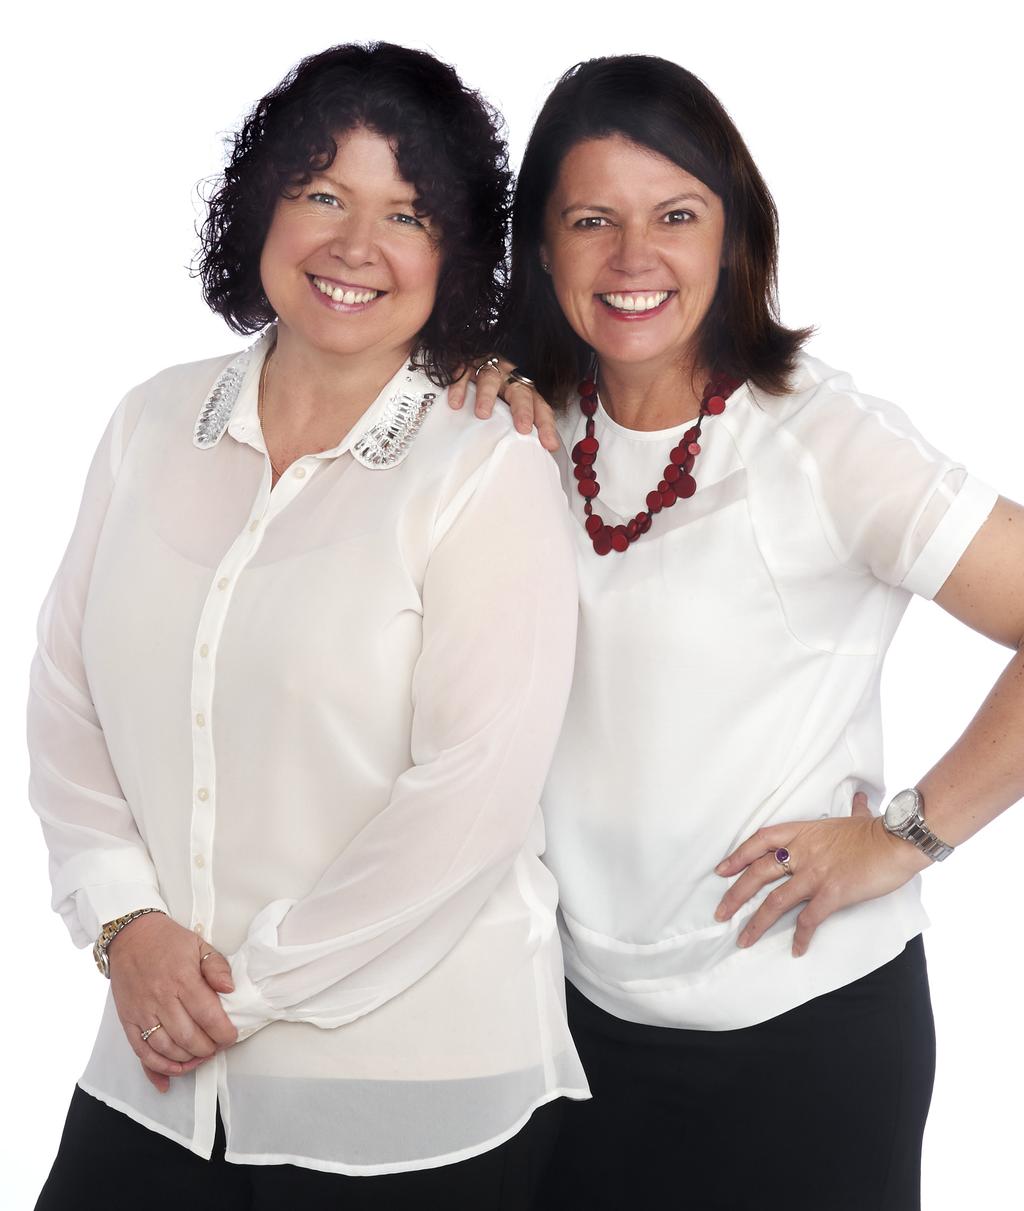 SOUND LIFE FINANCIAL SERVICES Since taking over Sound Life Financial Services in 2014, Jane and Thelma have completely overhauled the business.